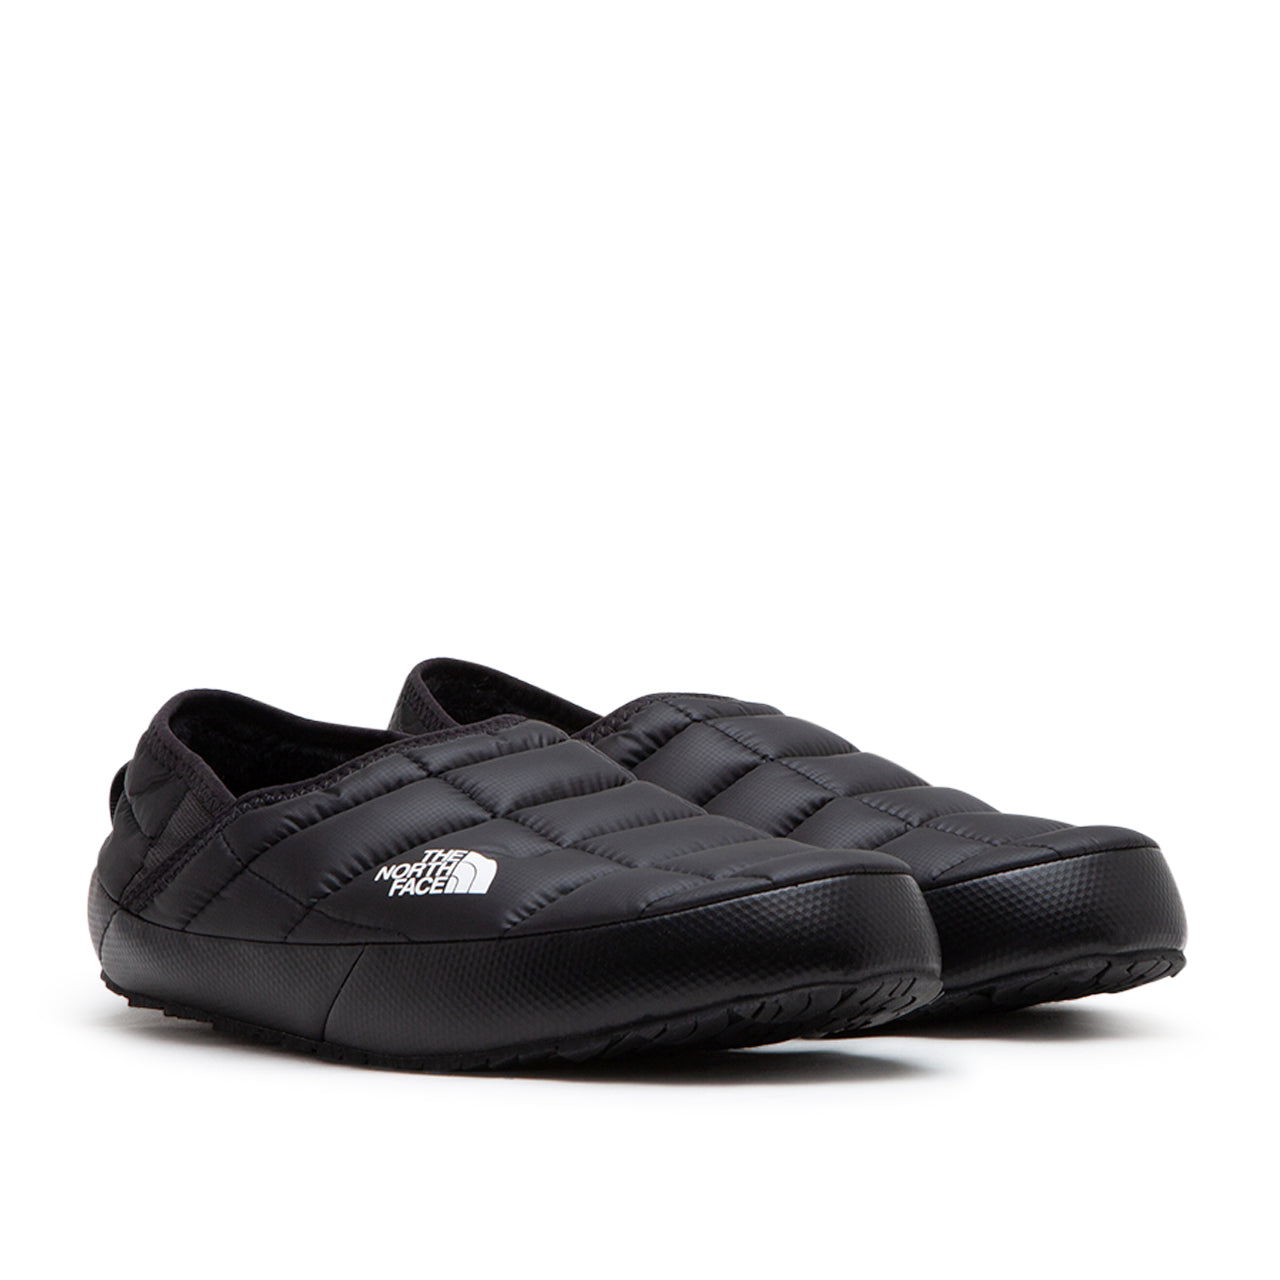 incl. VAT, excl Thermoball V Traction Winter Mules (Schwarz)  - Cheap Juzsports Jordan Outlet